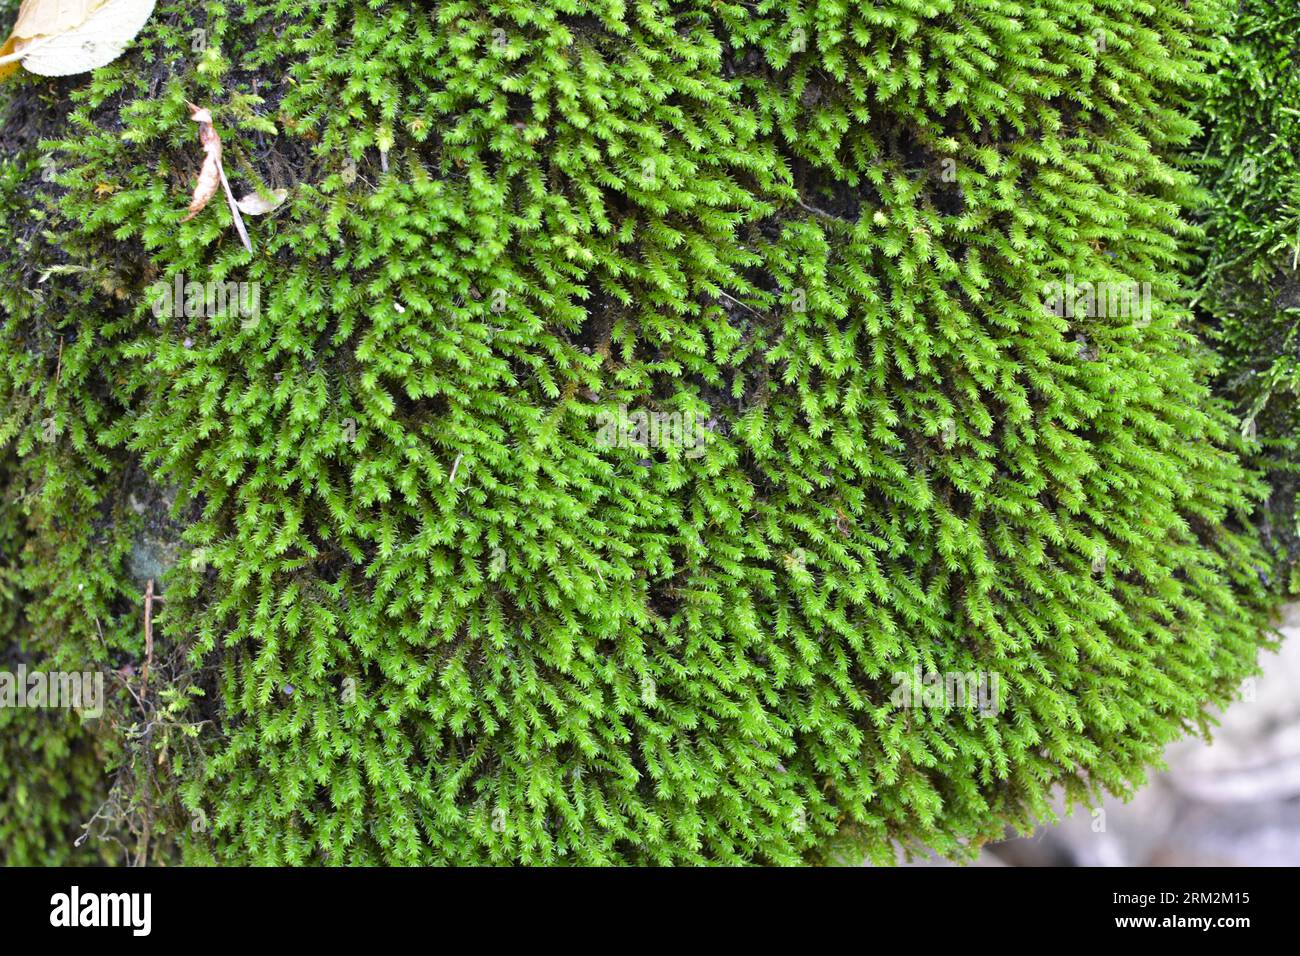 In the forest in the wild on the stone grows moss Anomodon Stock Photo